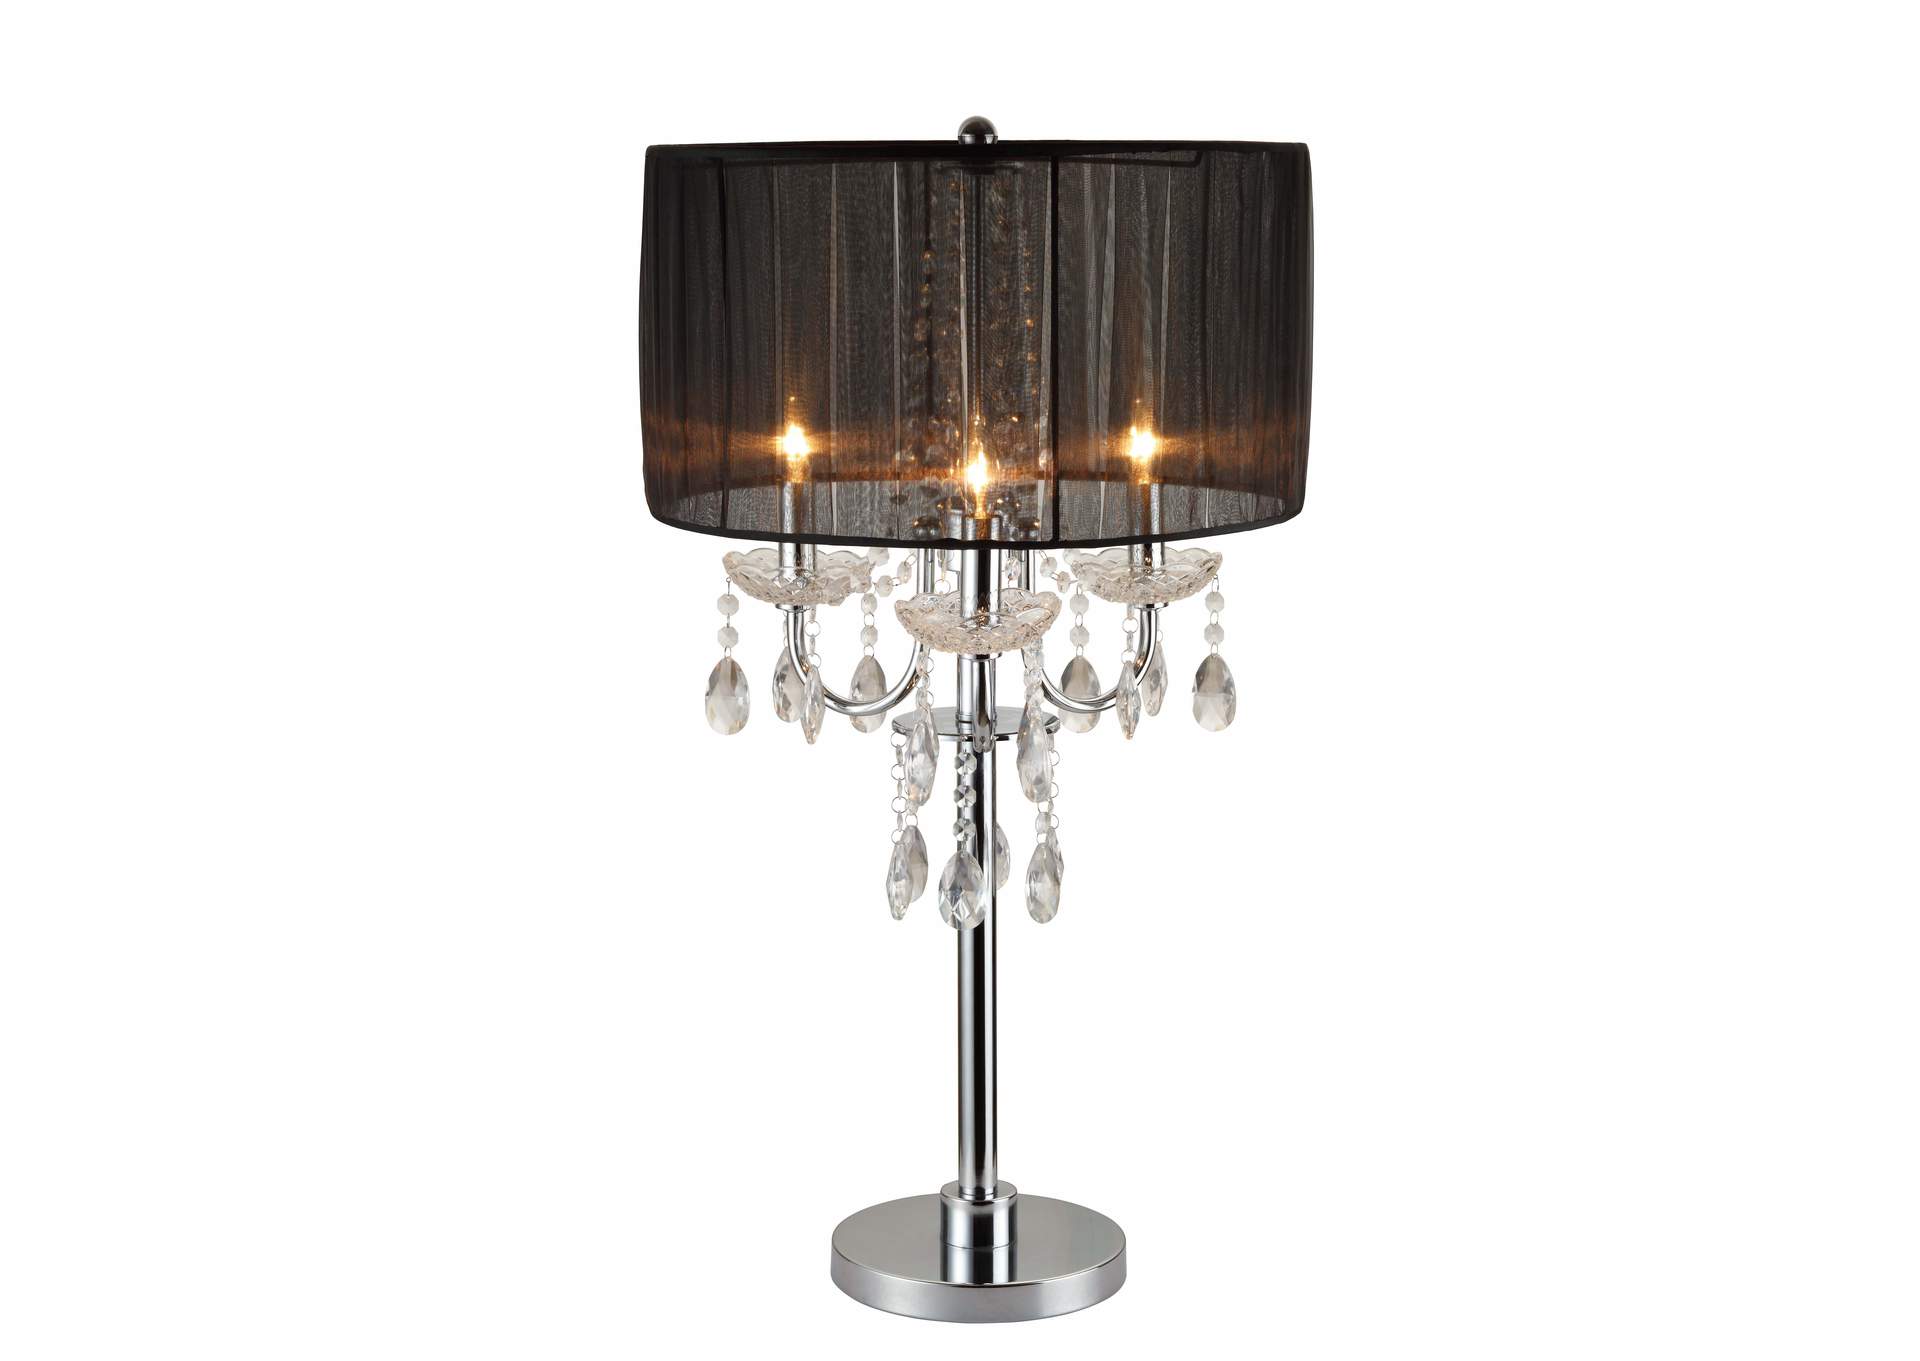 CHANDELIER TABLE TOUCH LAMP 29.5 H,Crown Mark